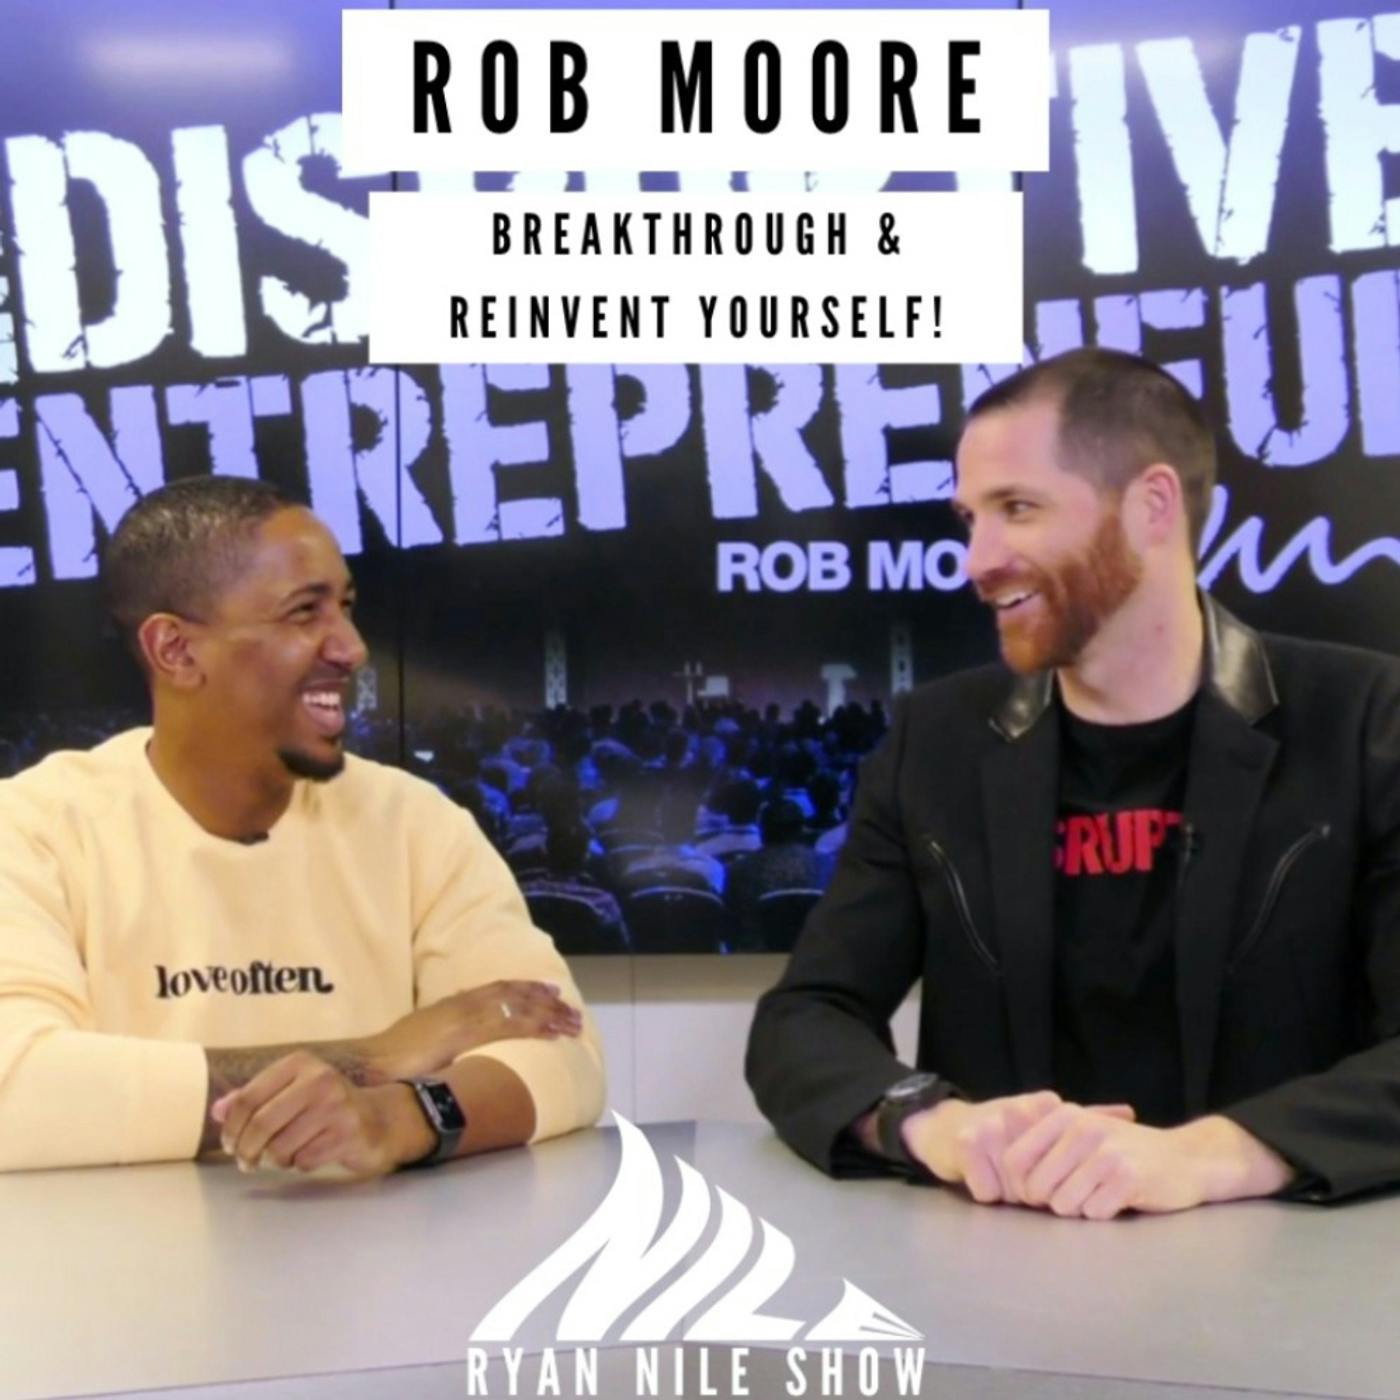 Rob Moore - How to Breakthrough & Reinvent Yourself!